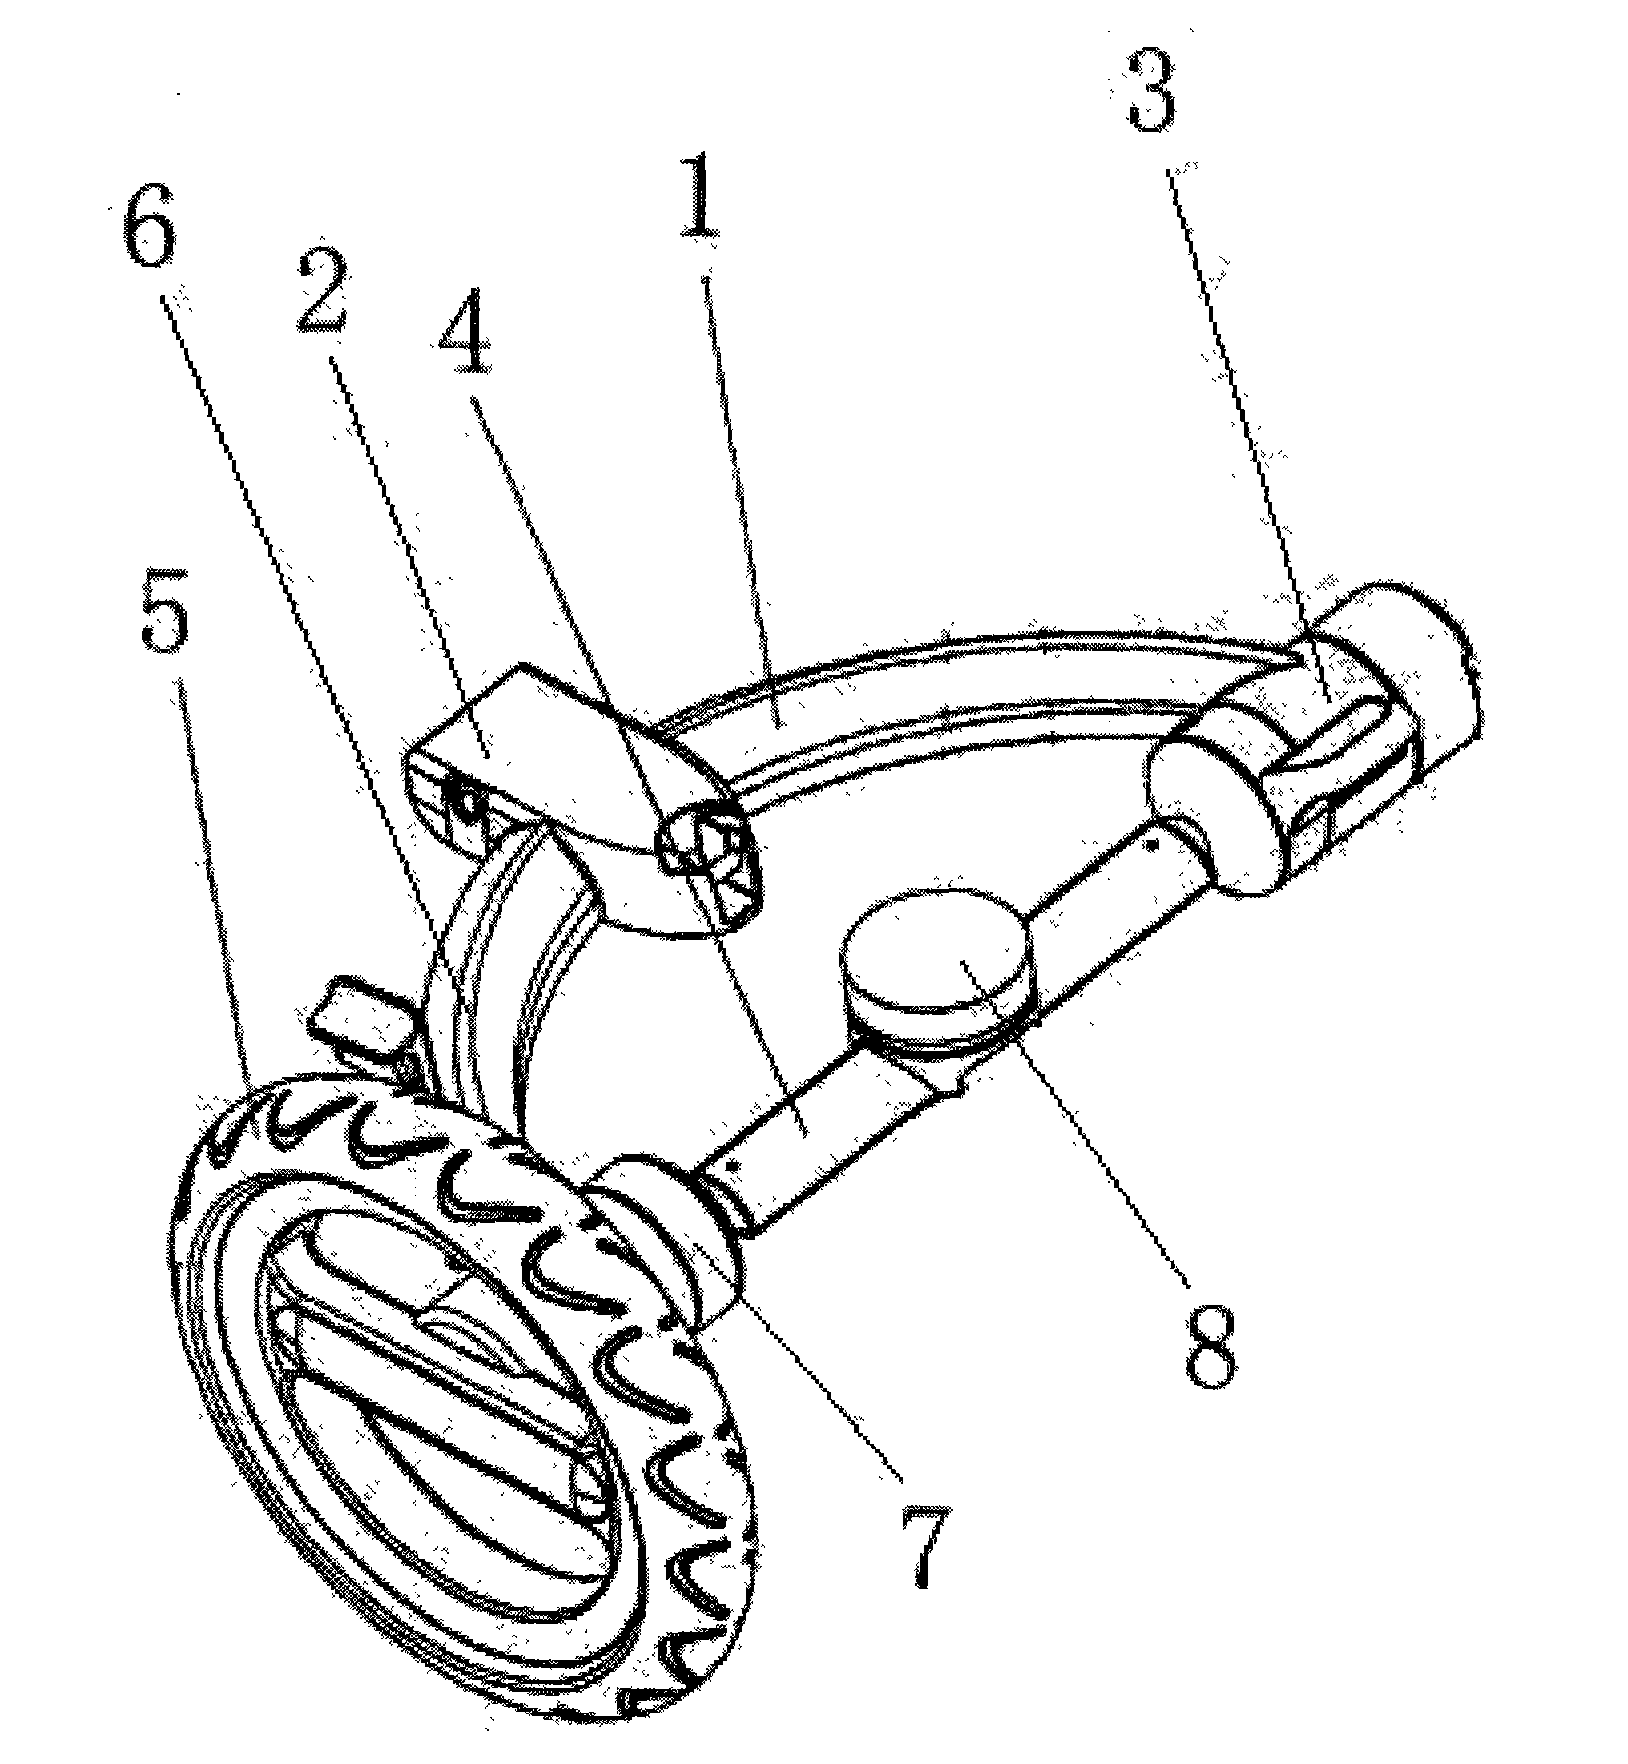 Rear wheel frame structure of child's vehicle